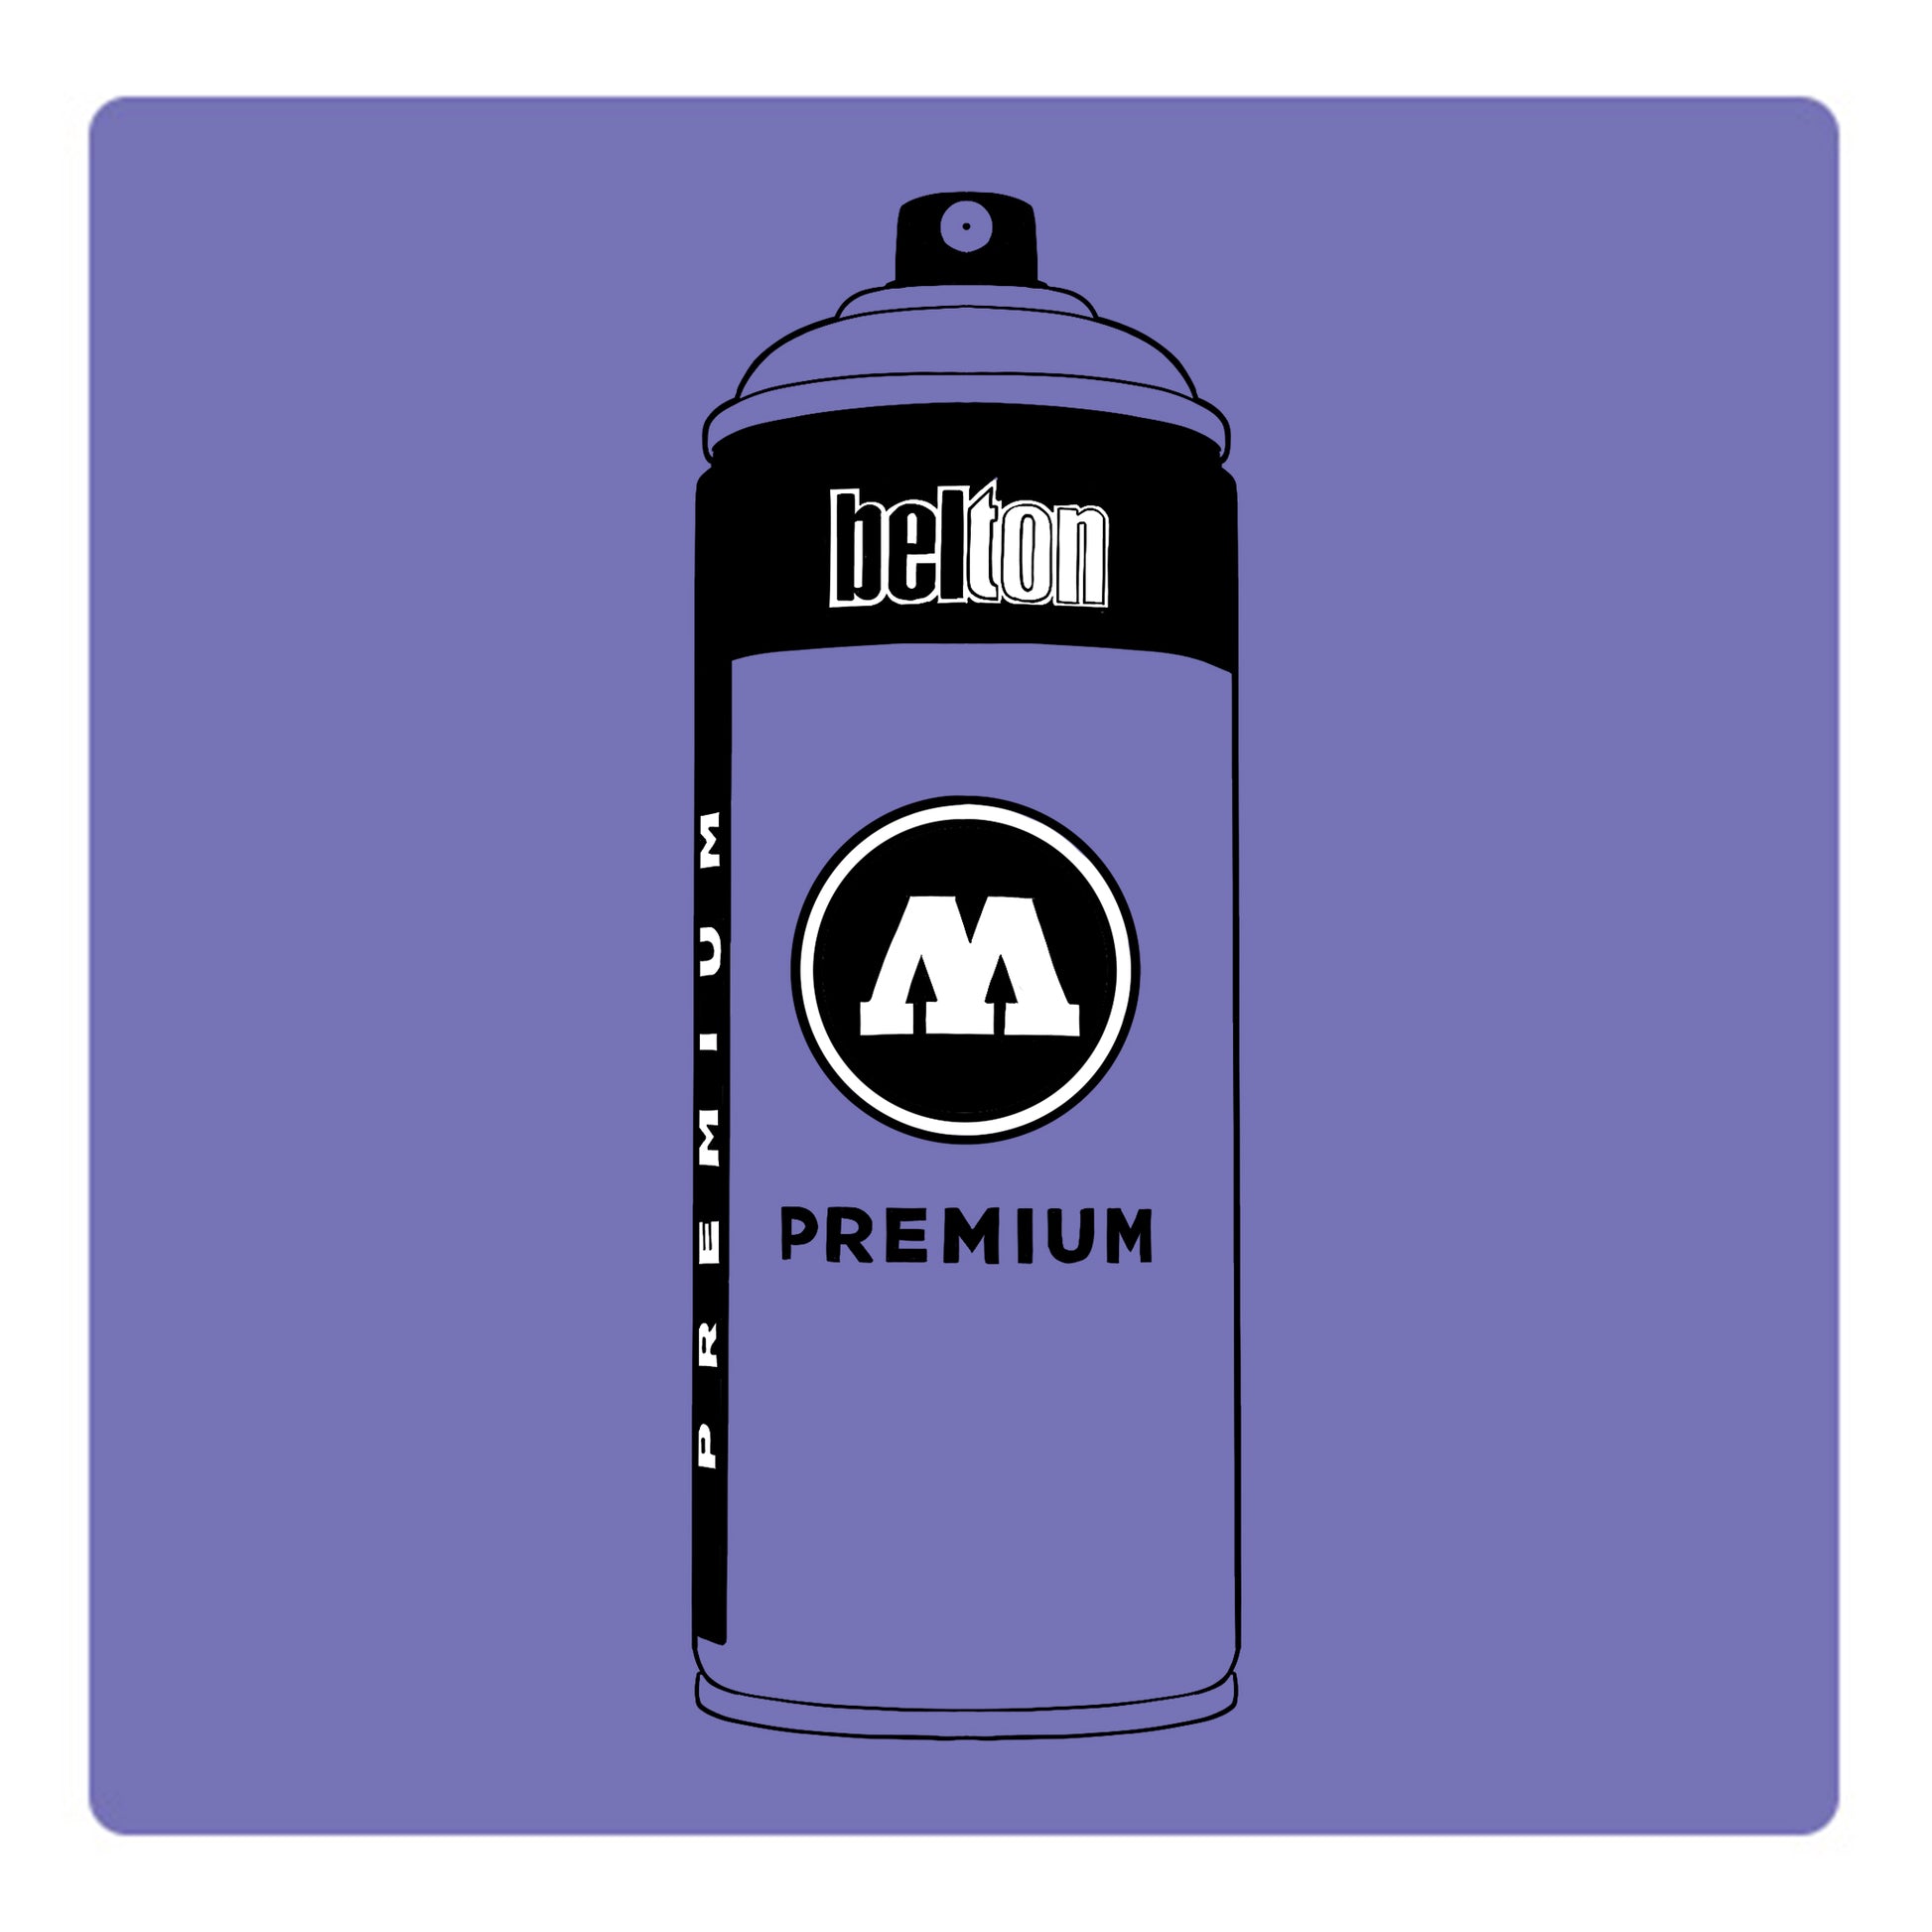 A black outline drawing of a dark lavender spray paint can with the words "belton","premium" and the letter"M" written on the face in black and white font. The background is a color swatch of the same Lavender with a white border.